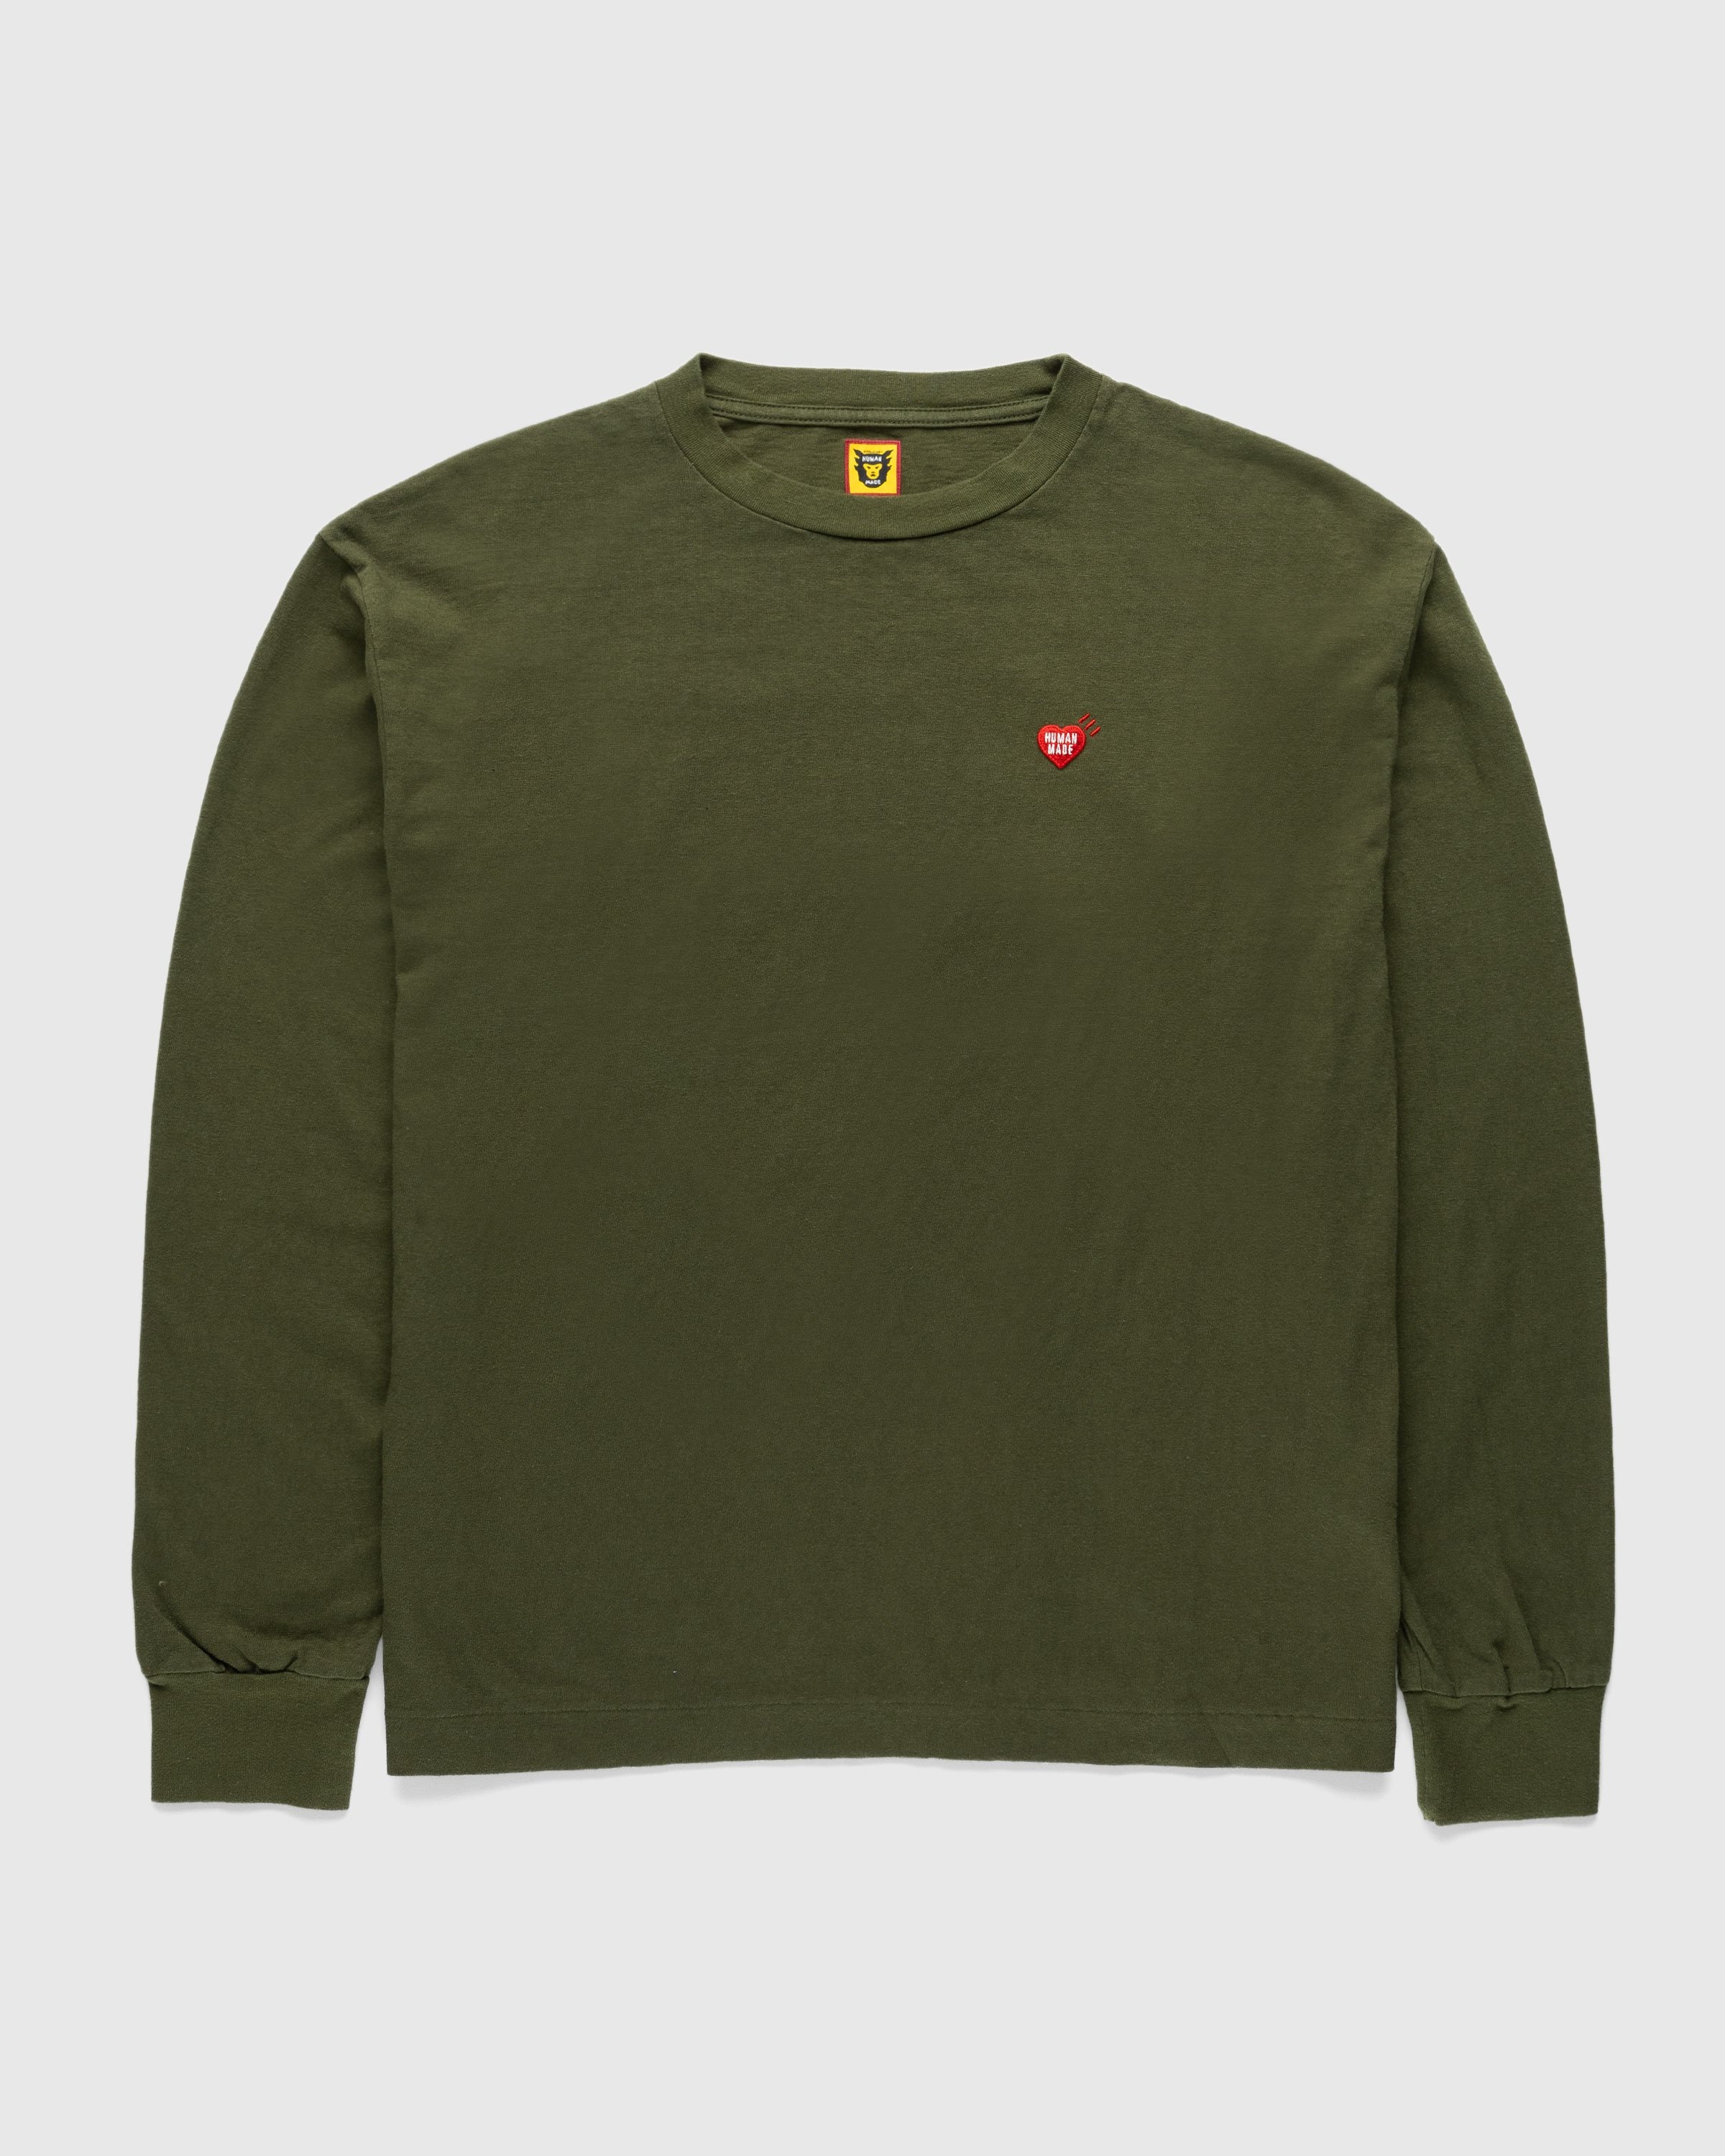 Human Made – GRAPHIC L/S T SHIRT #1 Olive Drab   Highsnobiety Shop